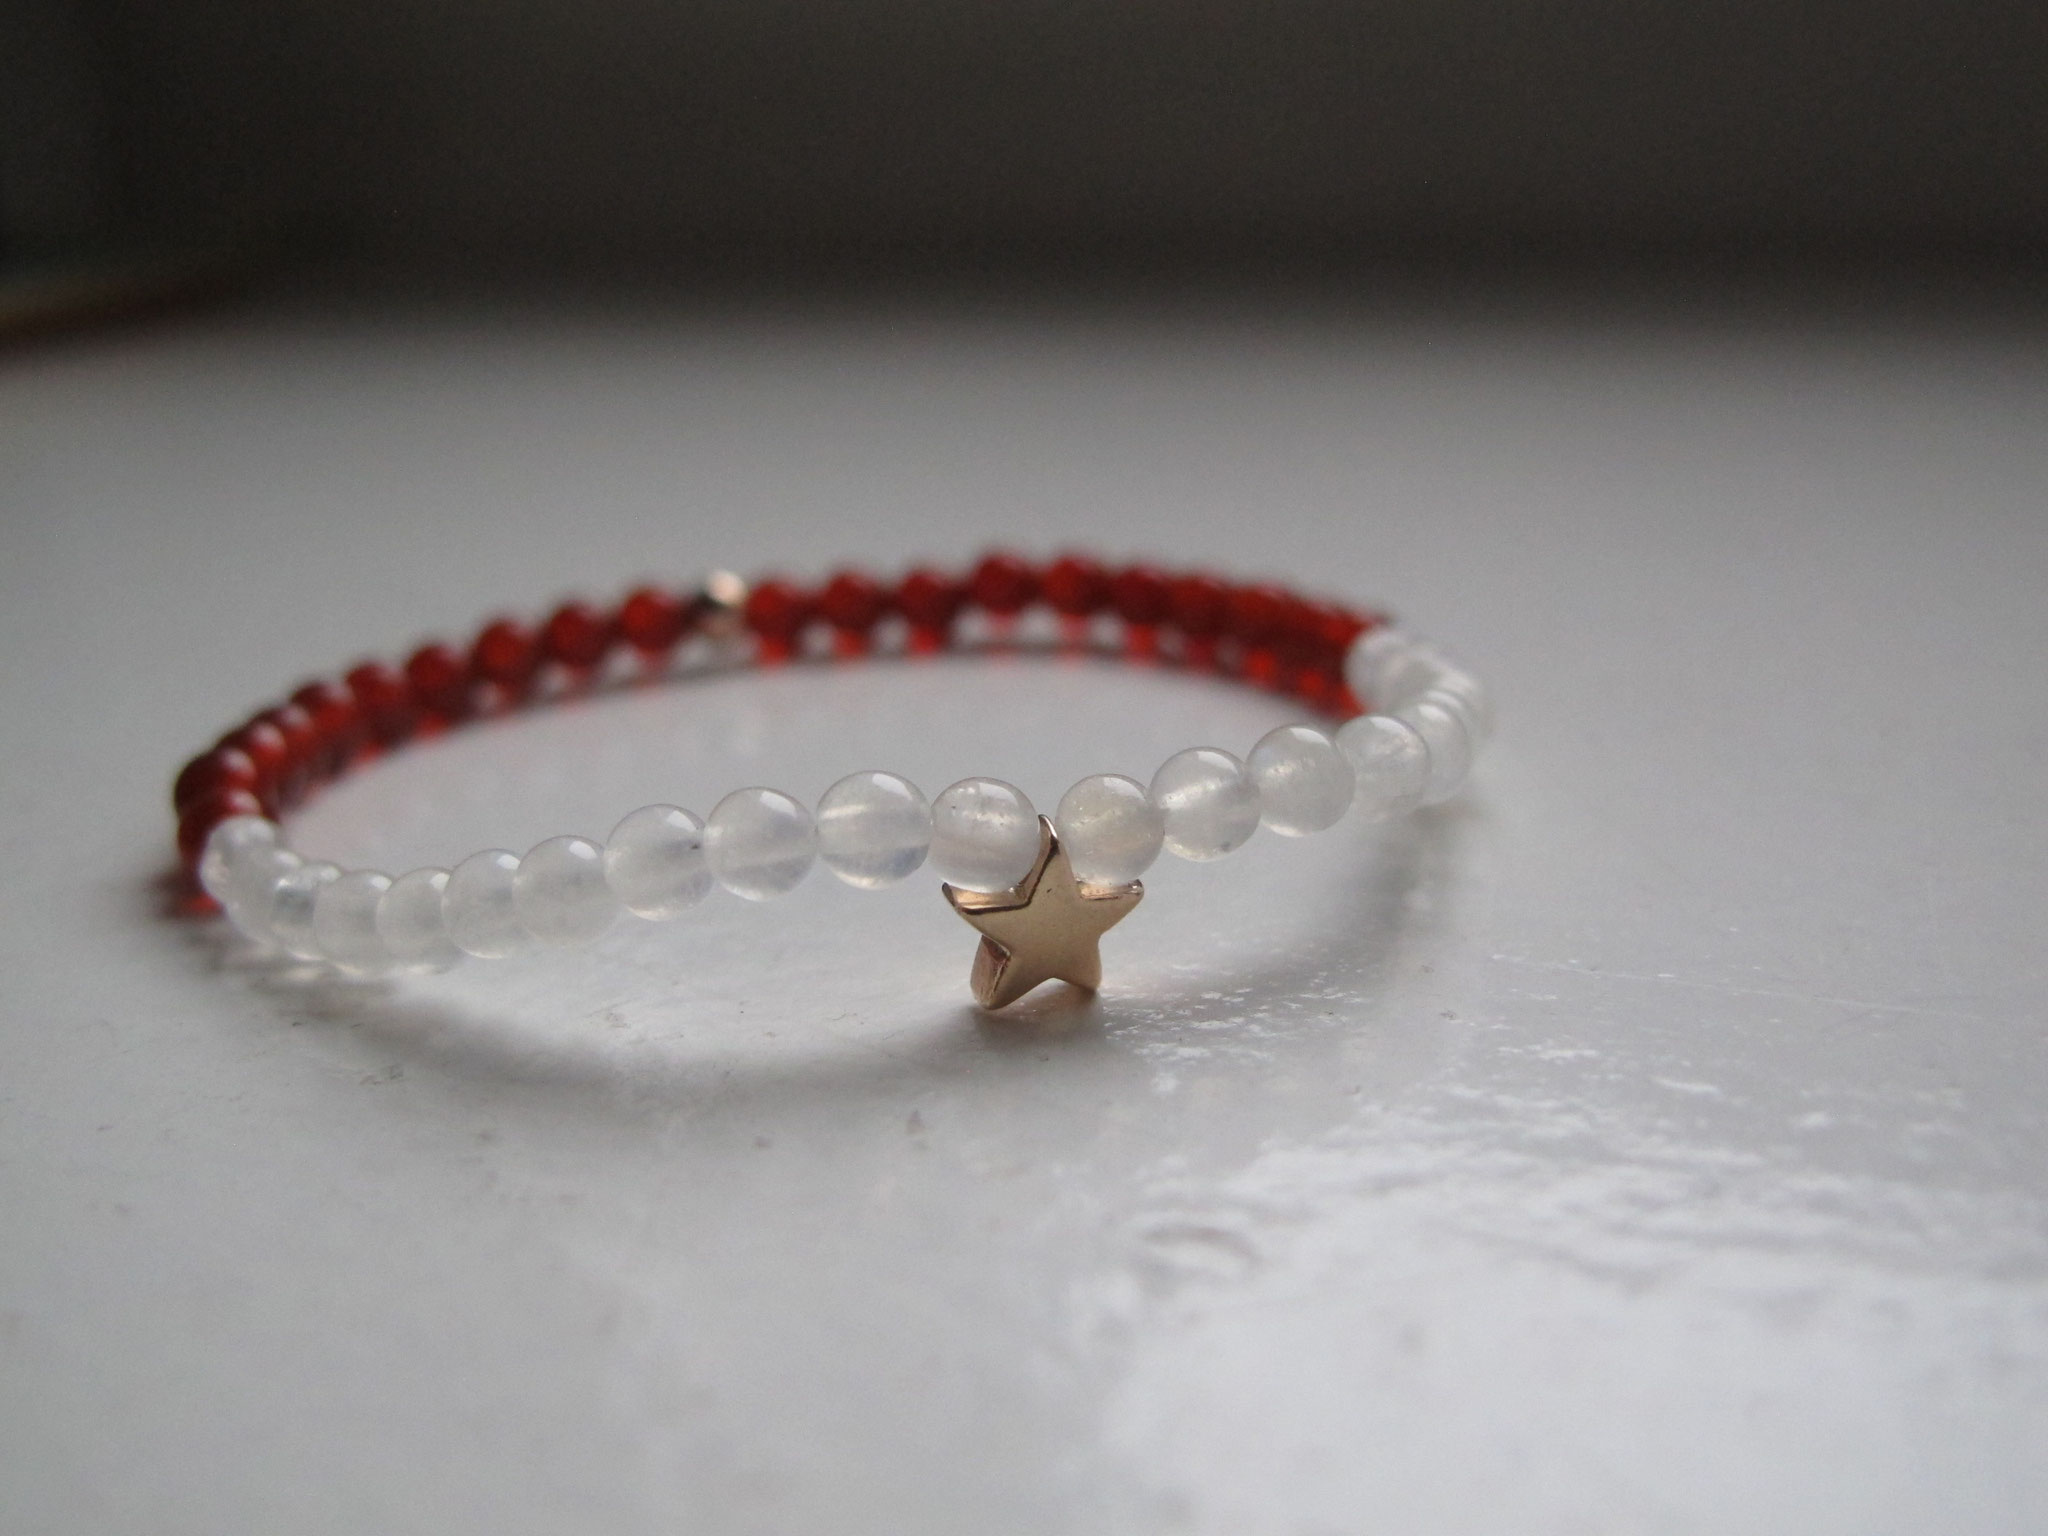 Harmonious combination of moonstone and red agate, highlighted with gold-plated star-shaped bead